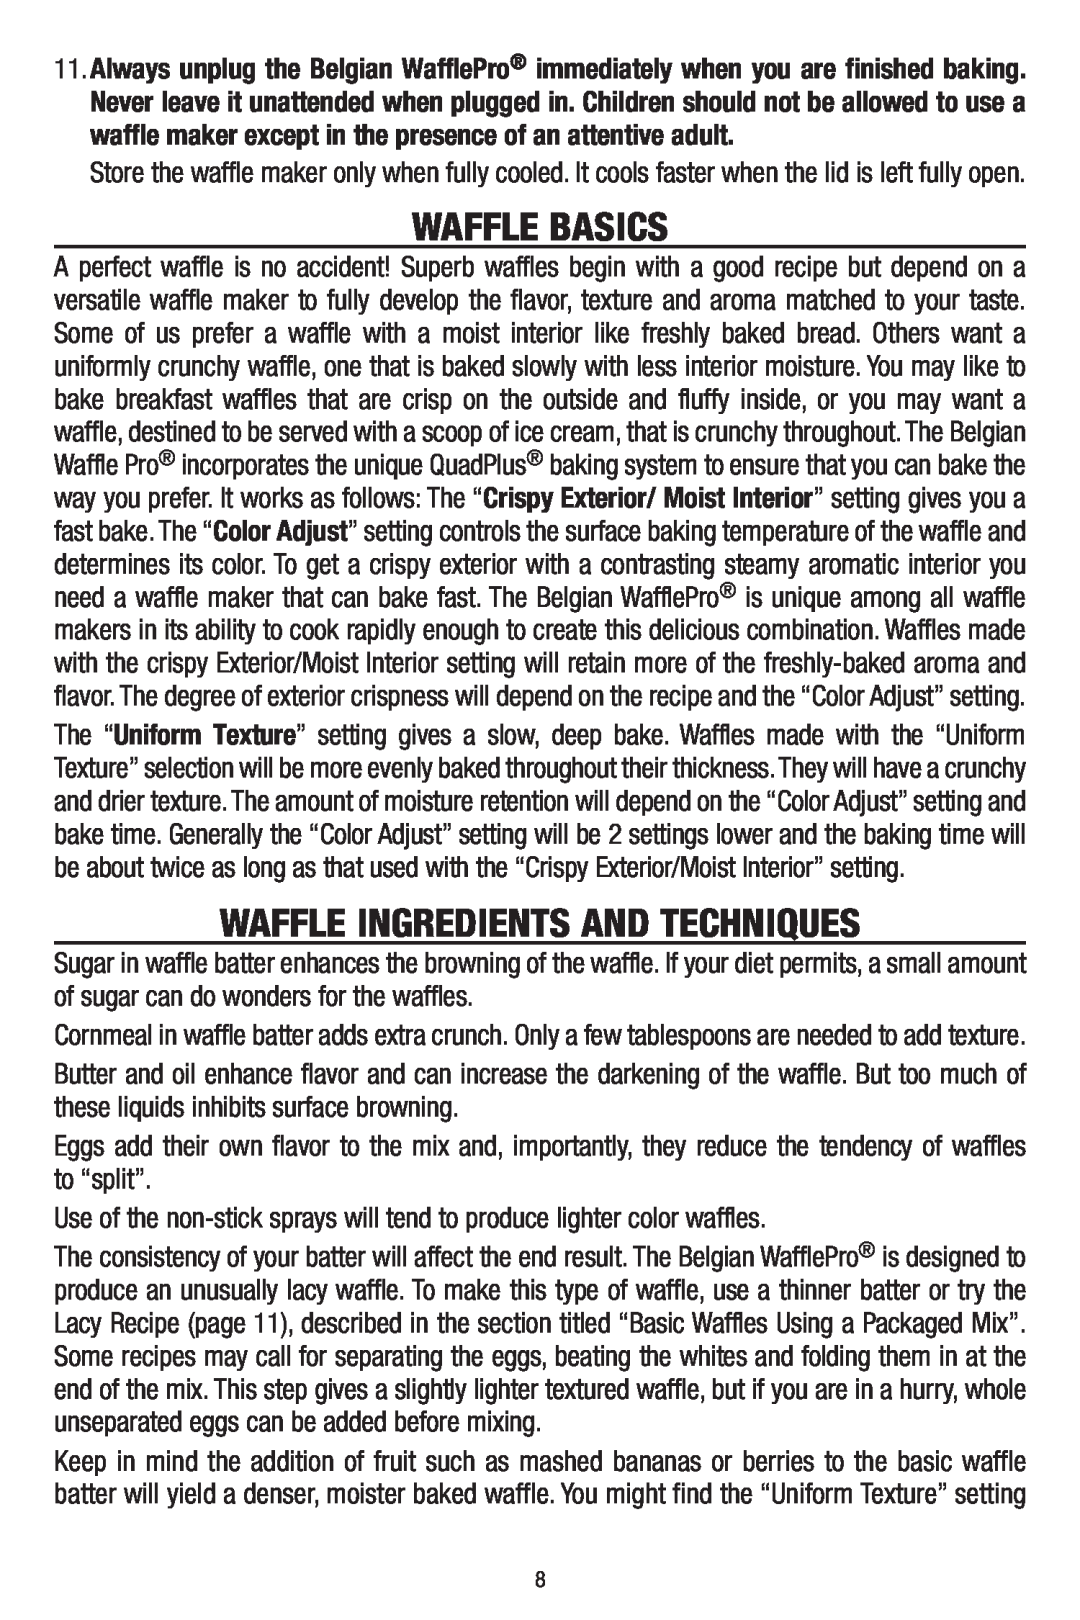 Chef's Choice 8500001, 840B manual Waffle Basics, Waffle Ingredients And Techniques 